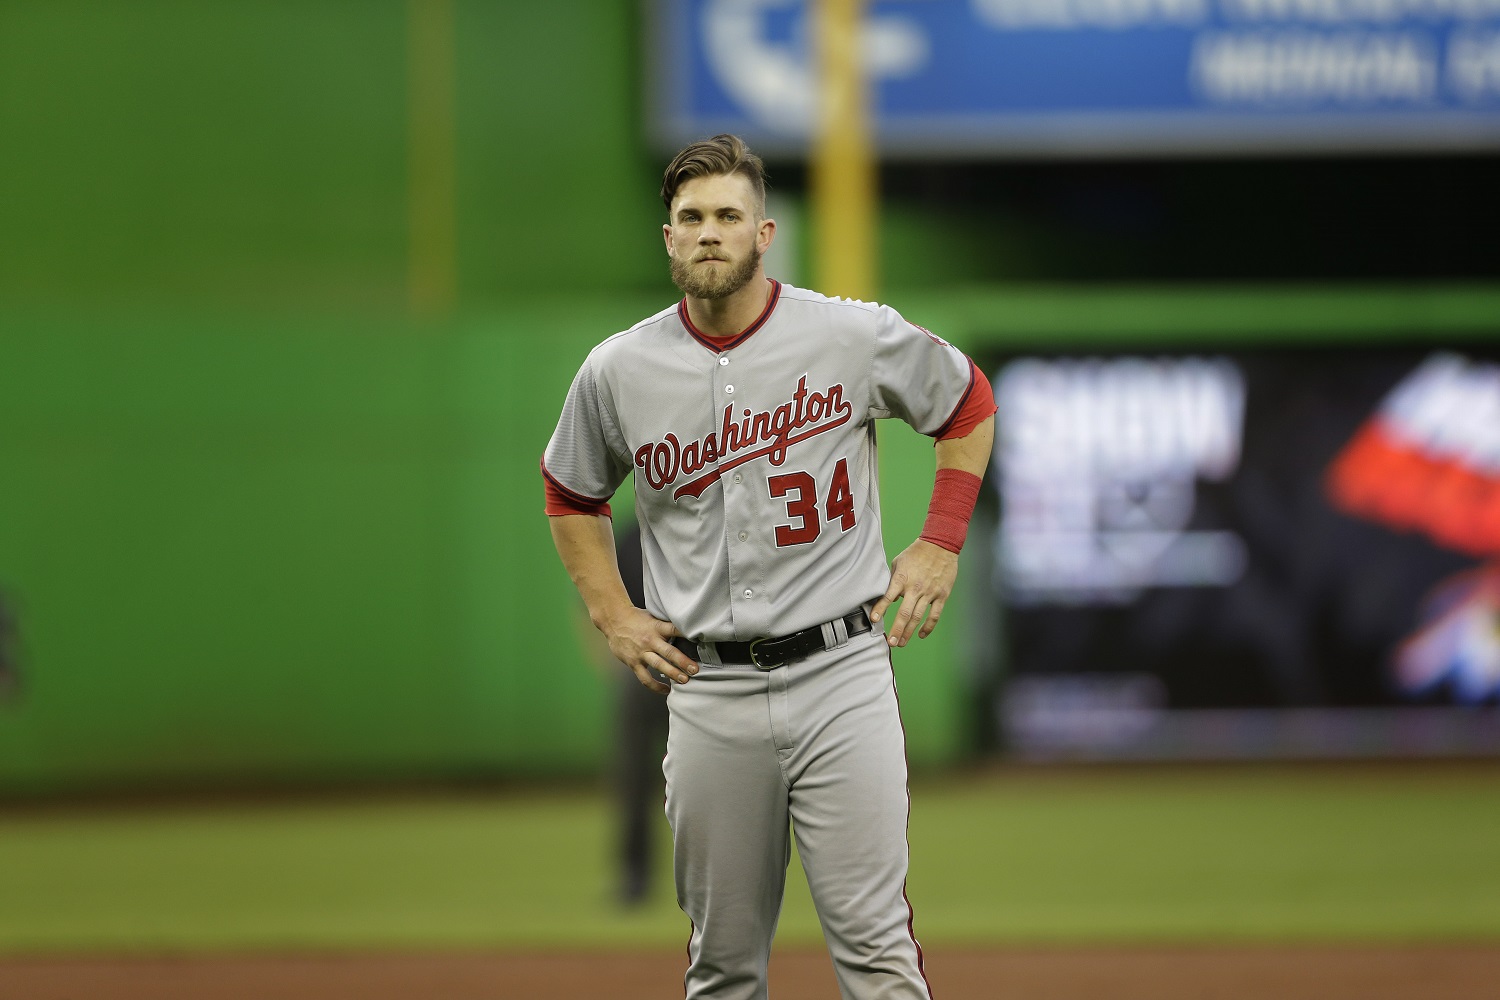 Washington Nationals' Bryce Harper during the inning of a MLB baseball game in Miami, Wednesday, April 17, 2013 against the Miami Marlins. (AP Photo/J Pat Carter)